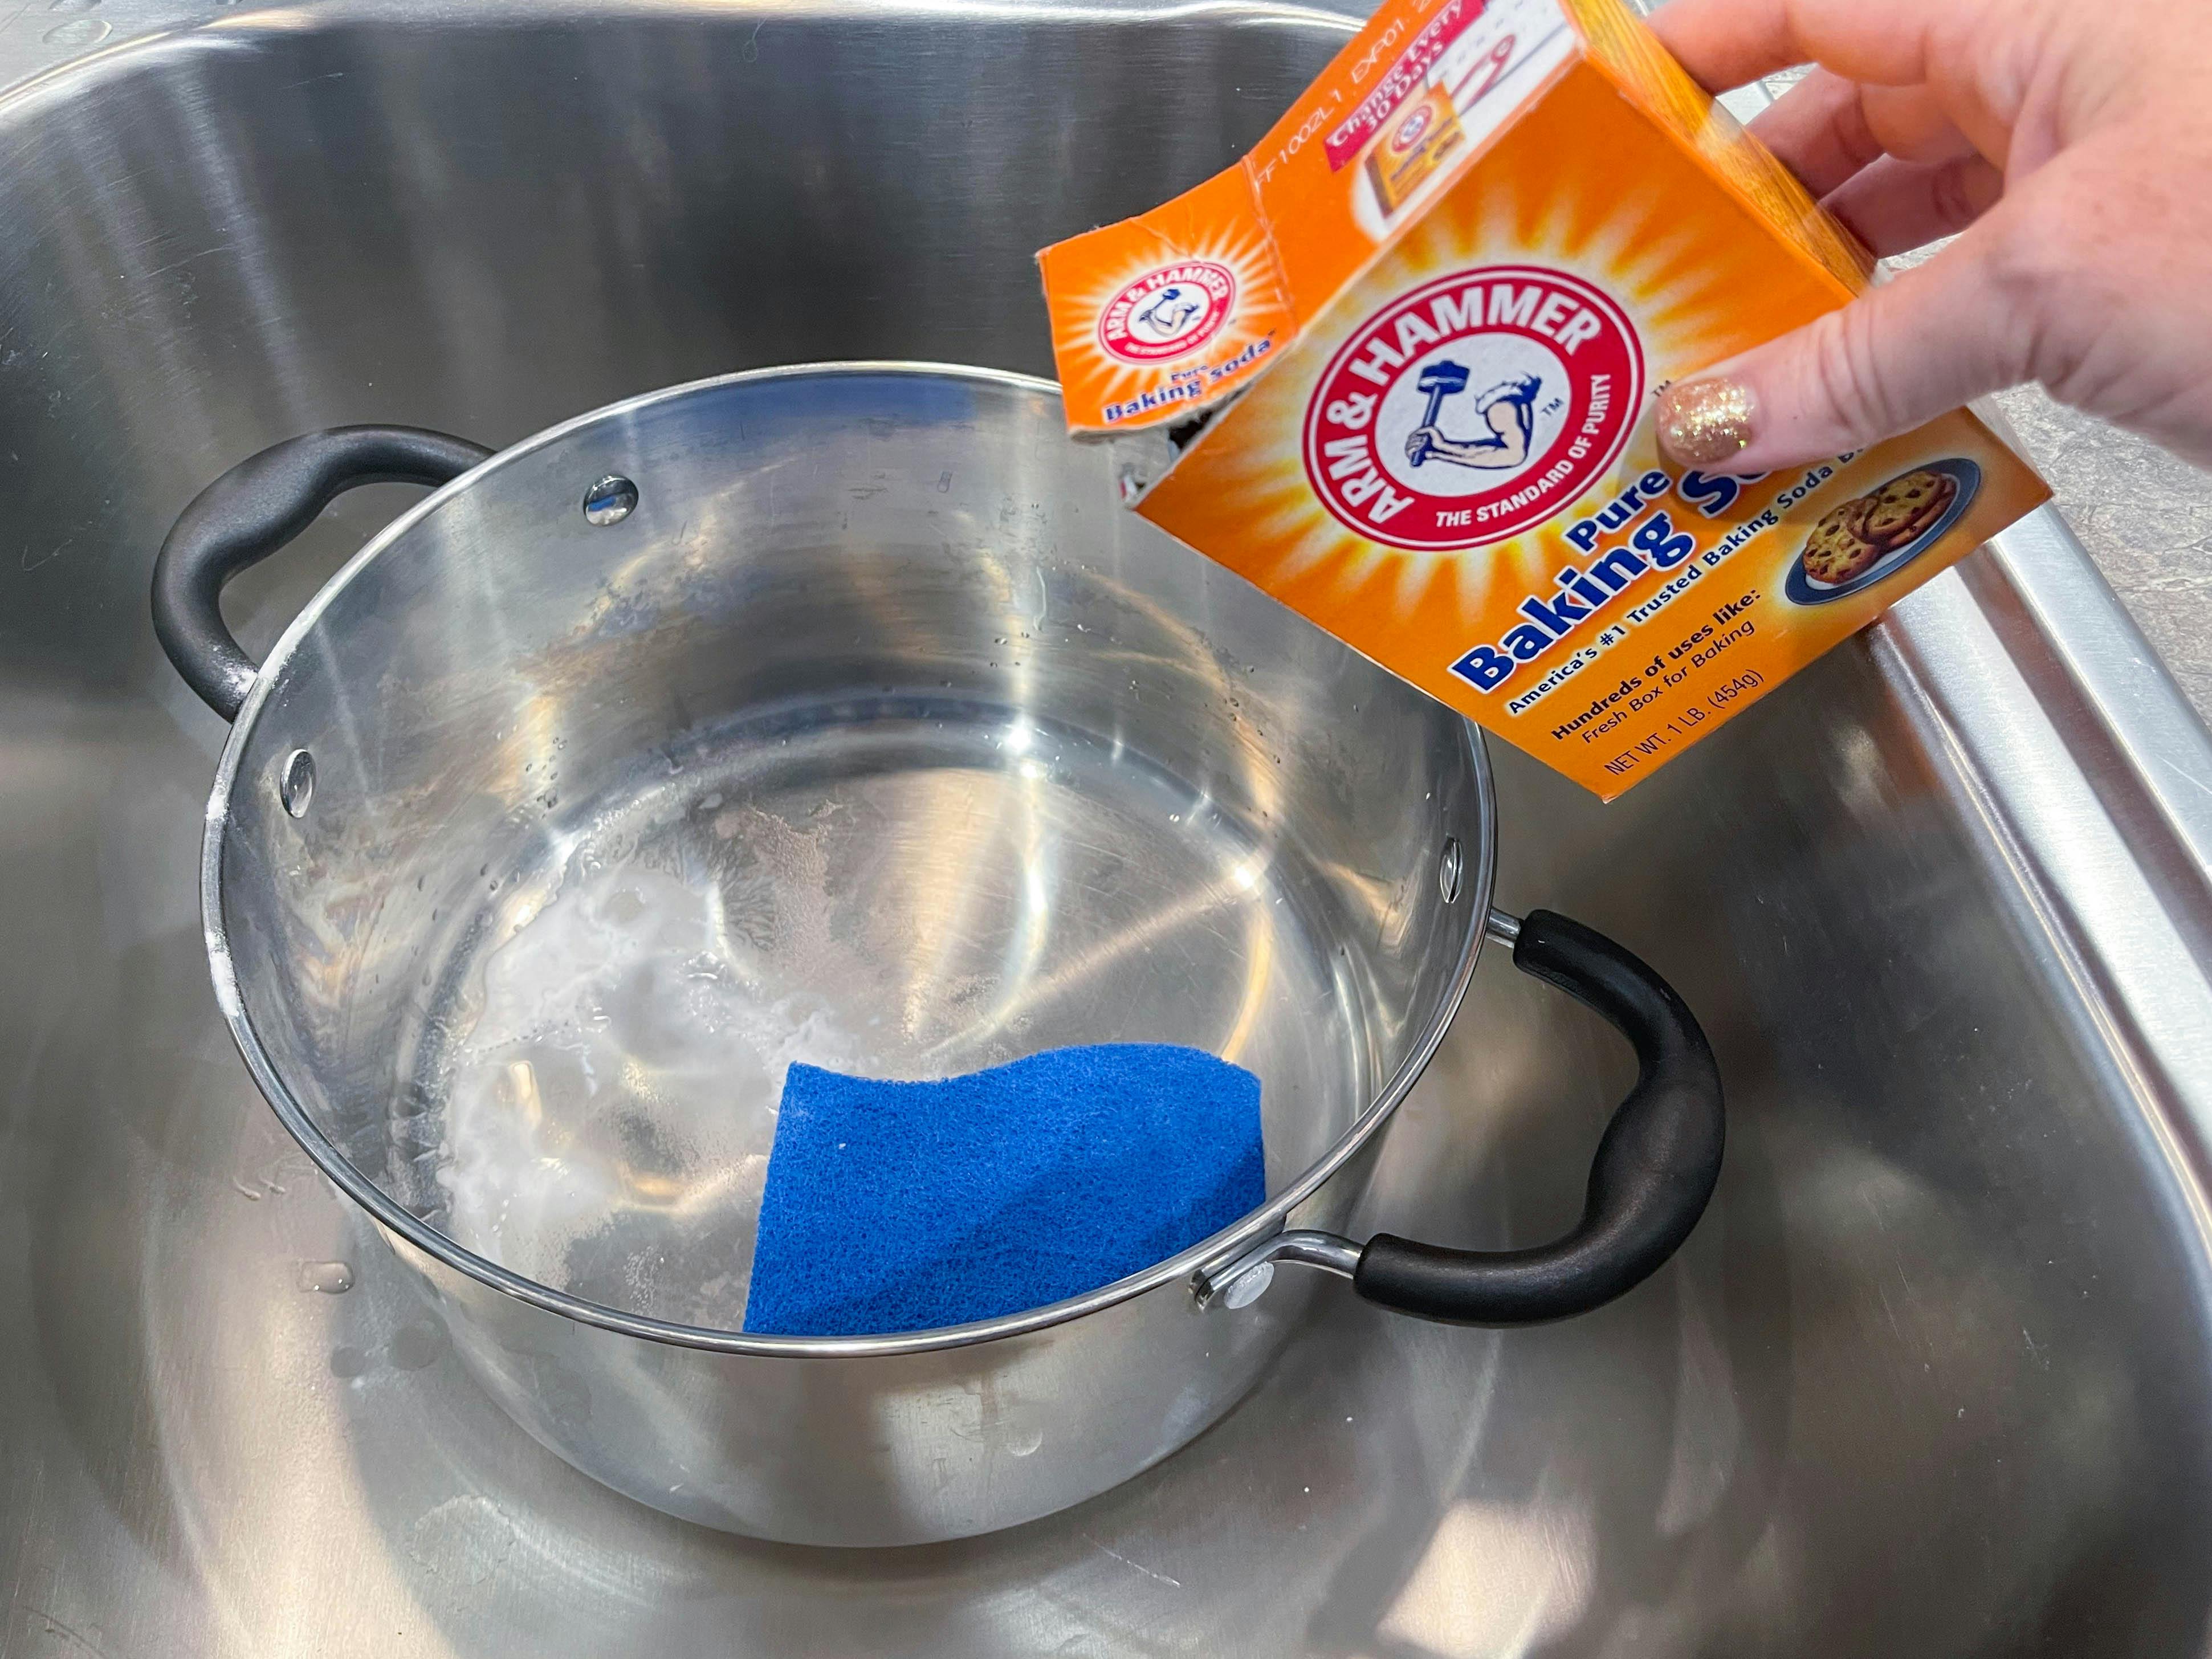 How to Clean Stainless Steel: 7 Brilliant Ways You've Never Heard Before - The Krazy Coupon Lady